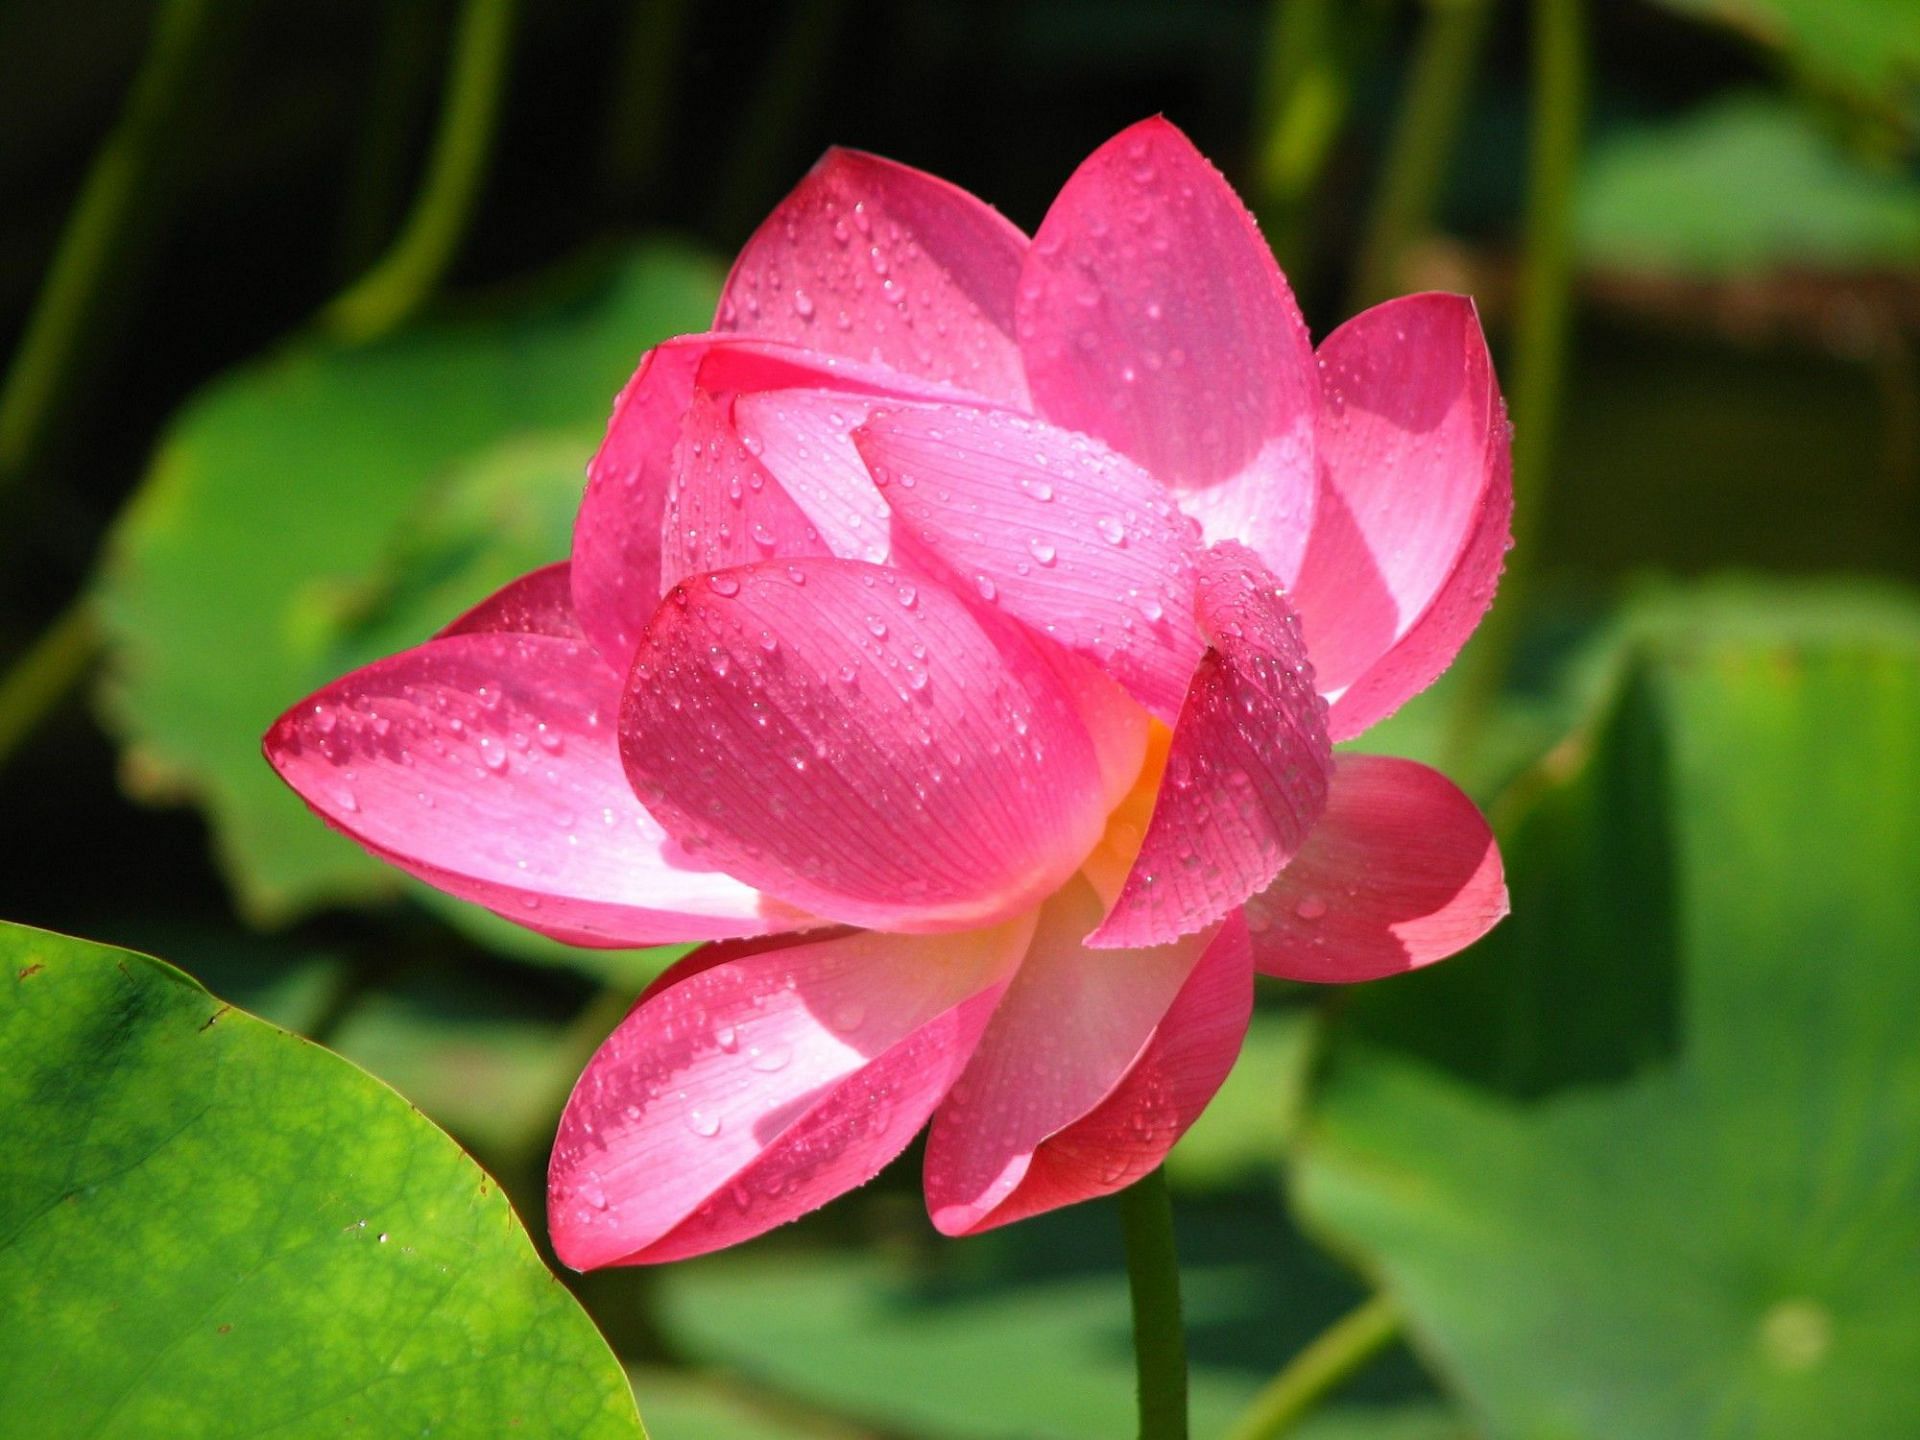 Lotus stem can be consumed in a wide array of ways (Image via freepik)